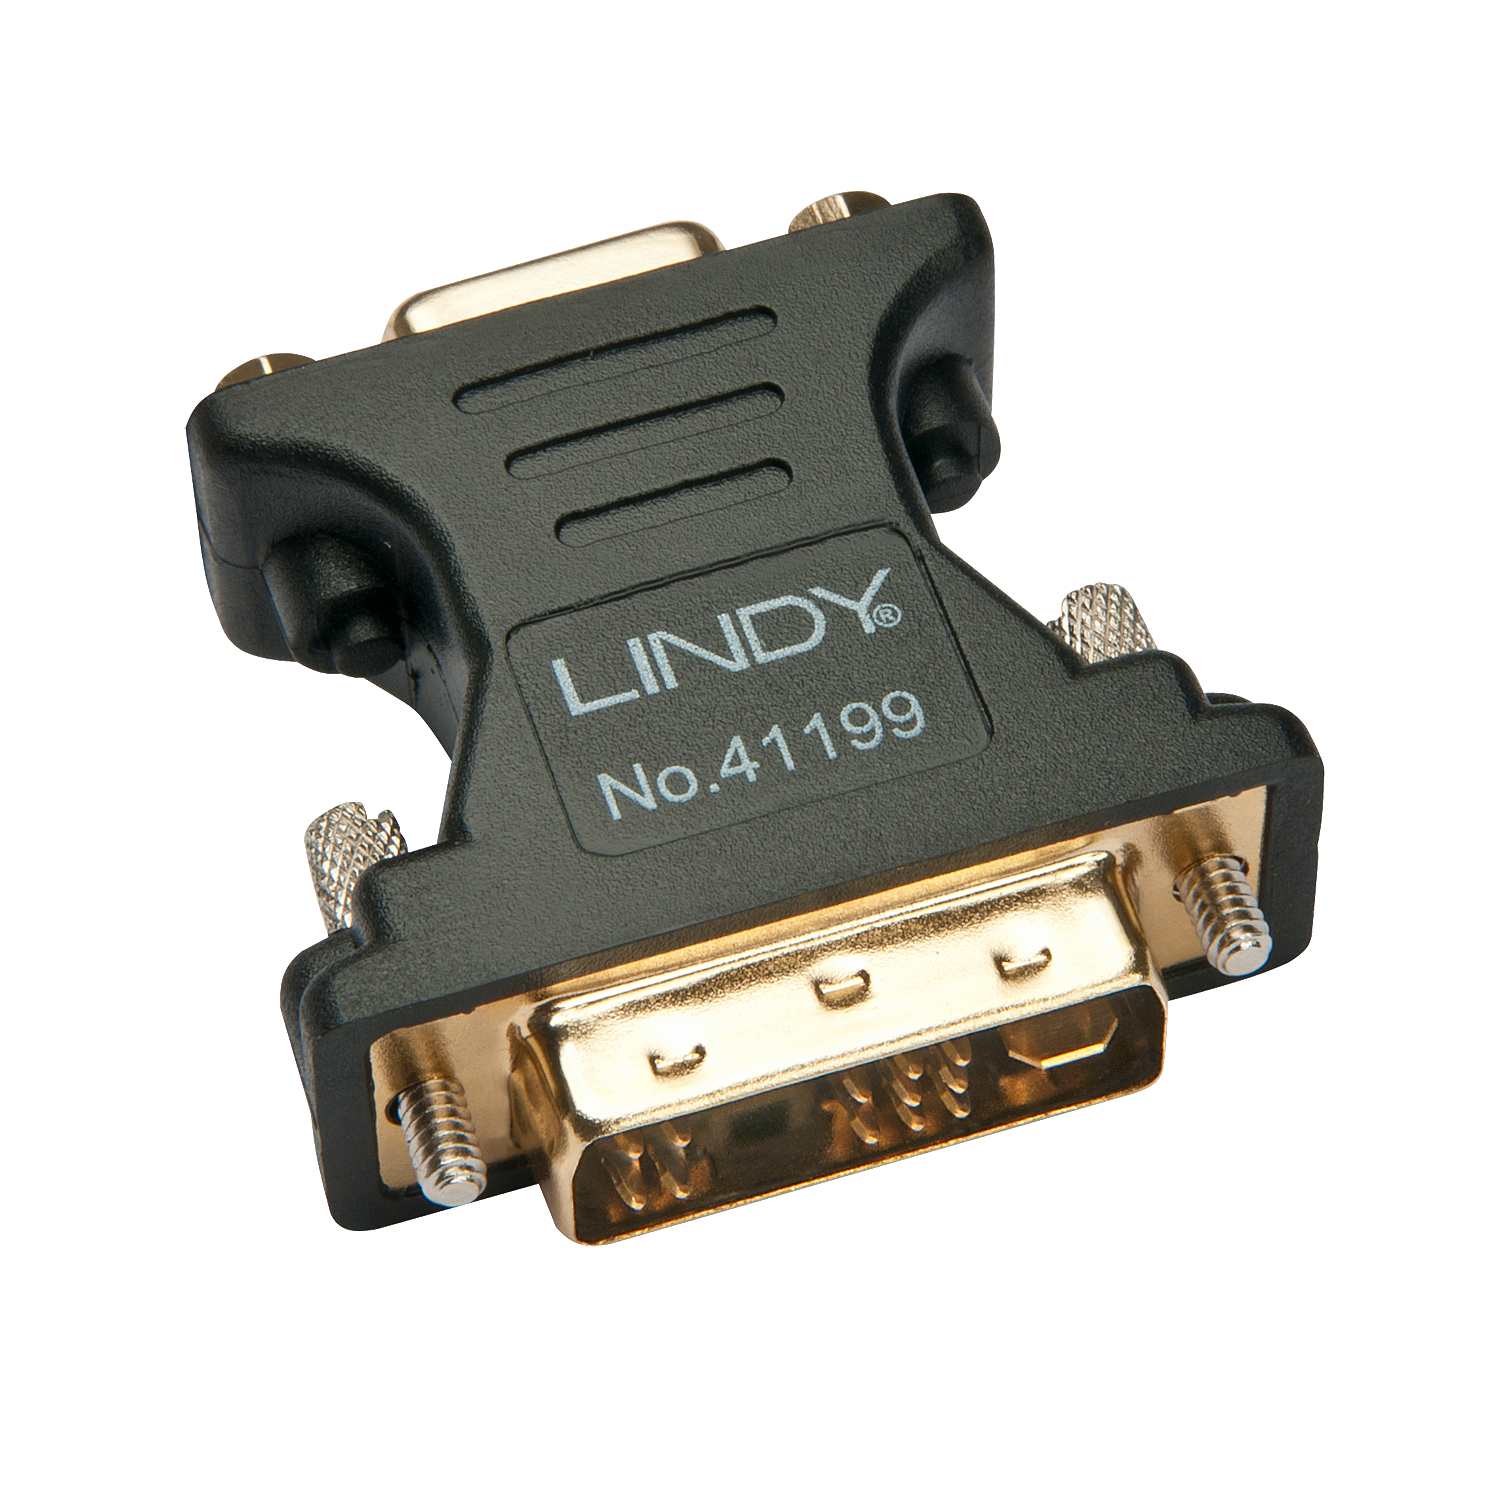 Photos - Cable (video, audio, USB) Lindy DVI-A Male to VGA Female Adapter, Black 41199 